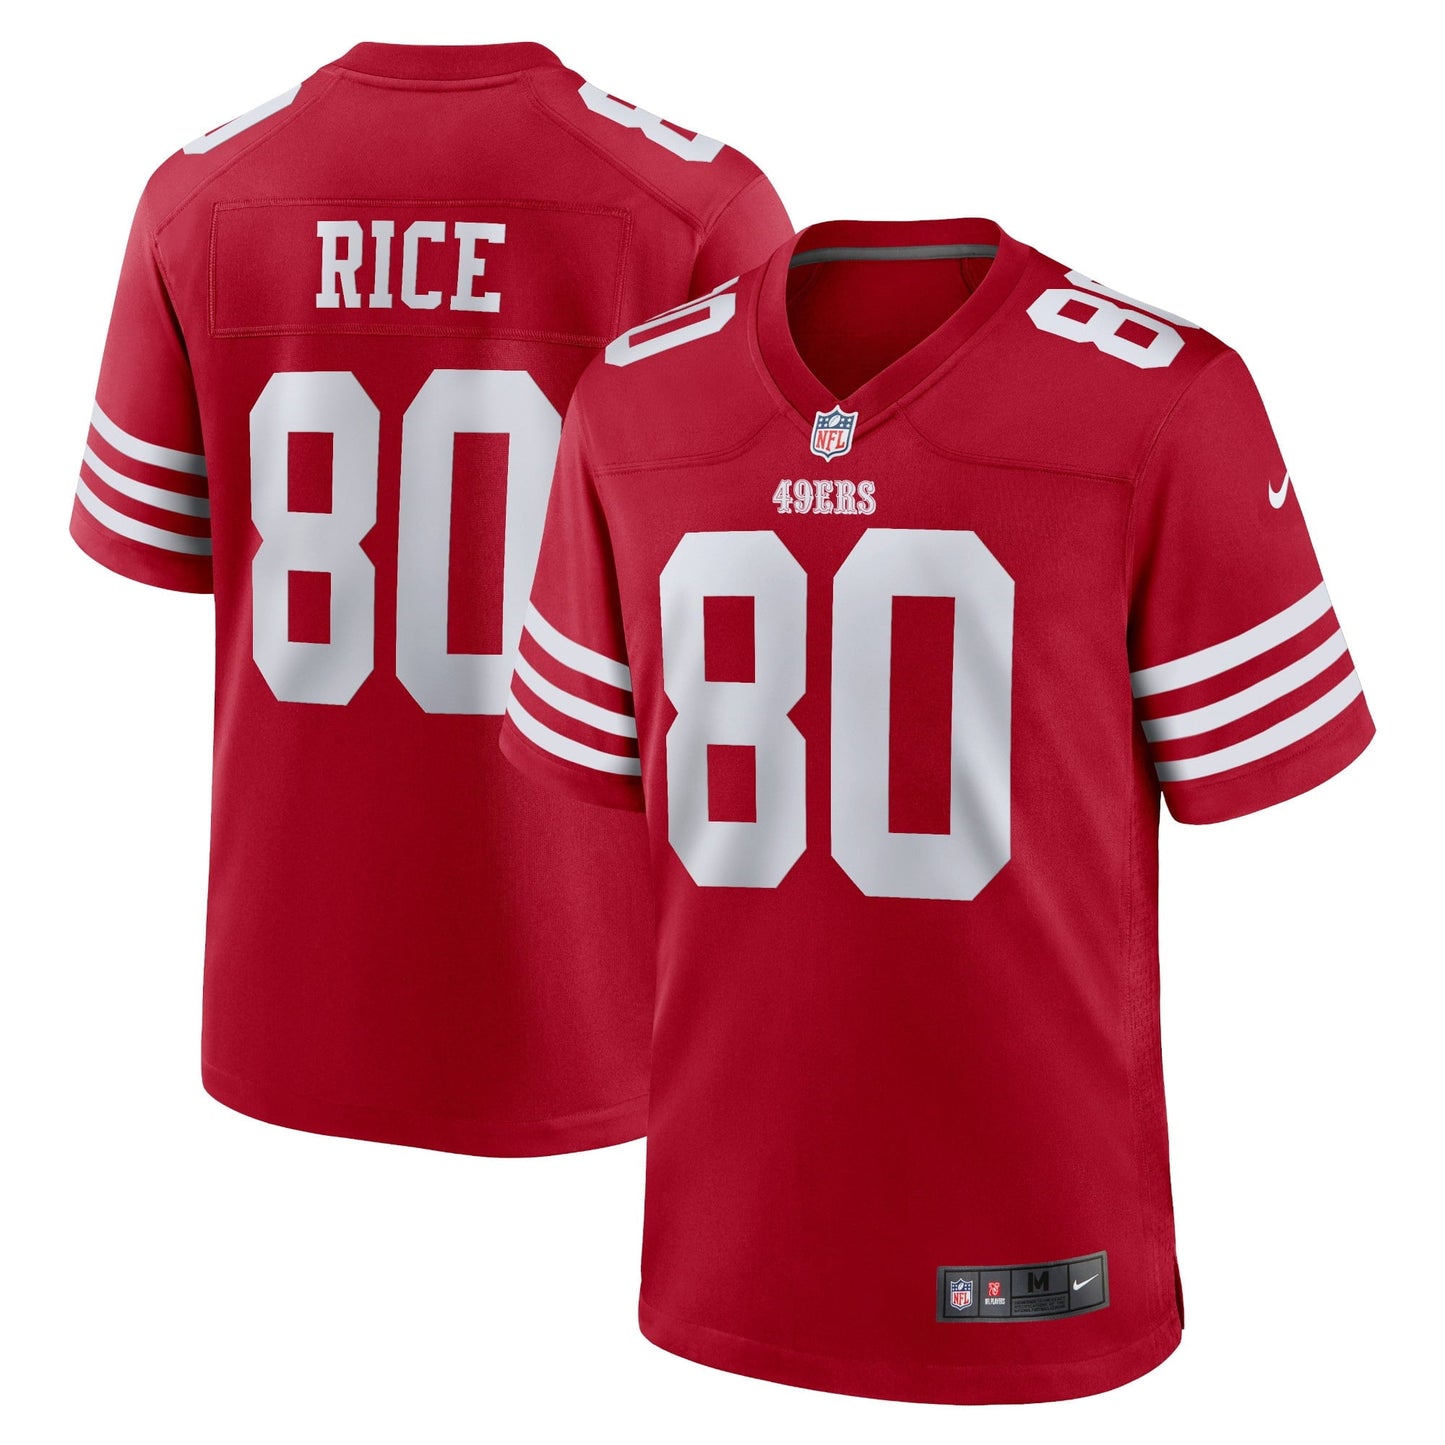 Men's Nike Jerry Rice Scarlet San Francisco 49ers Retired Team Player Game Jersey